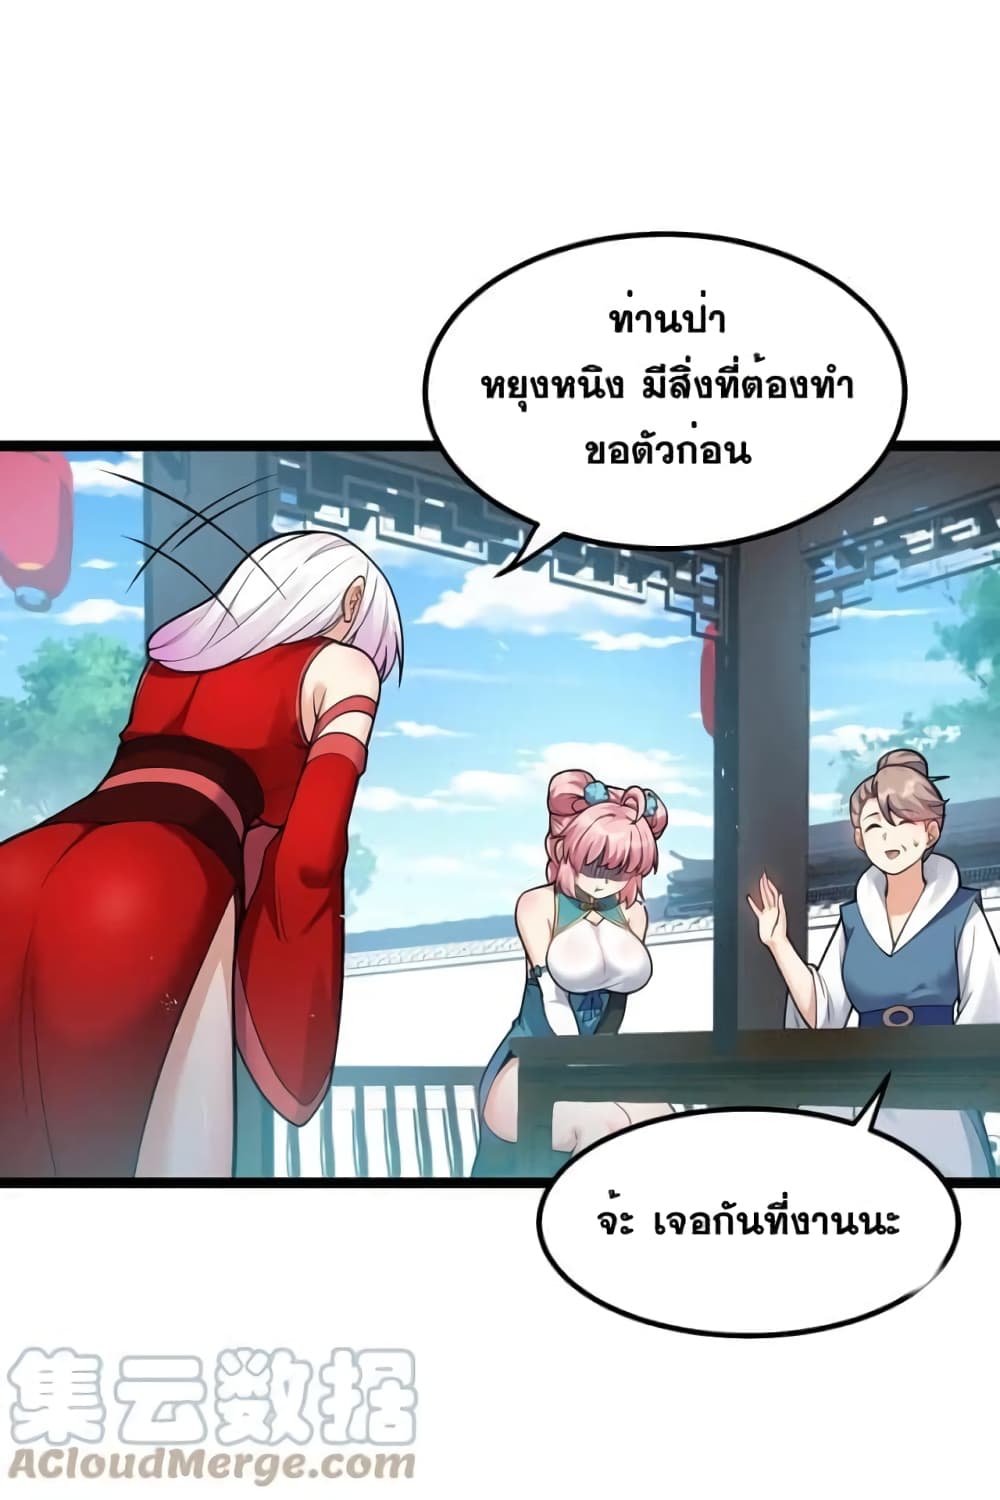 Godsian Masian from Another World ตอนที่ 110 (1)